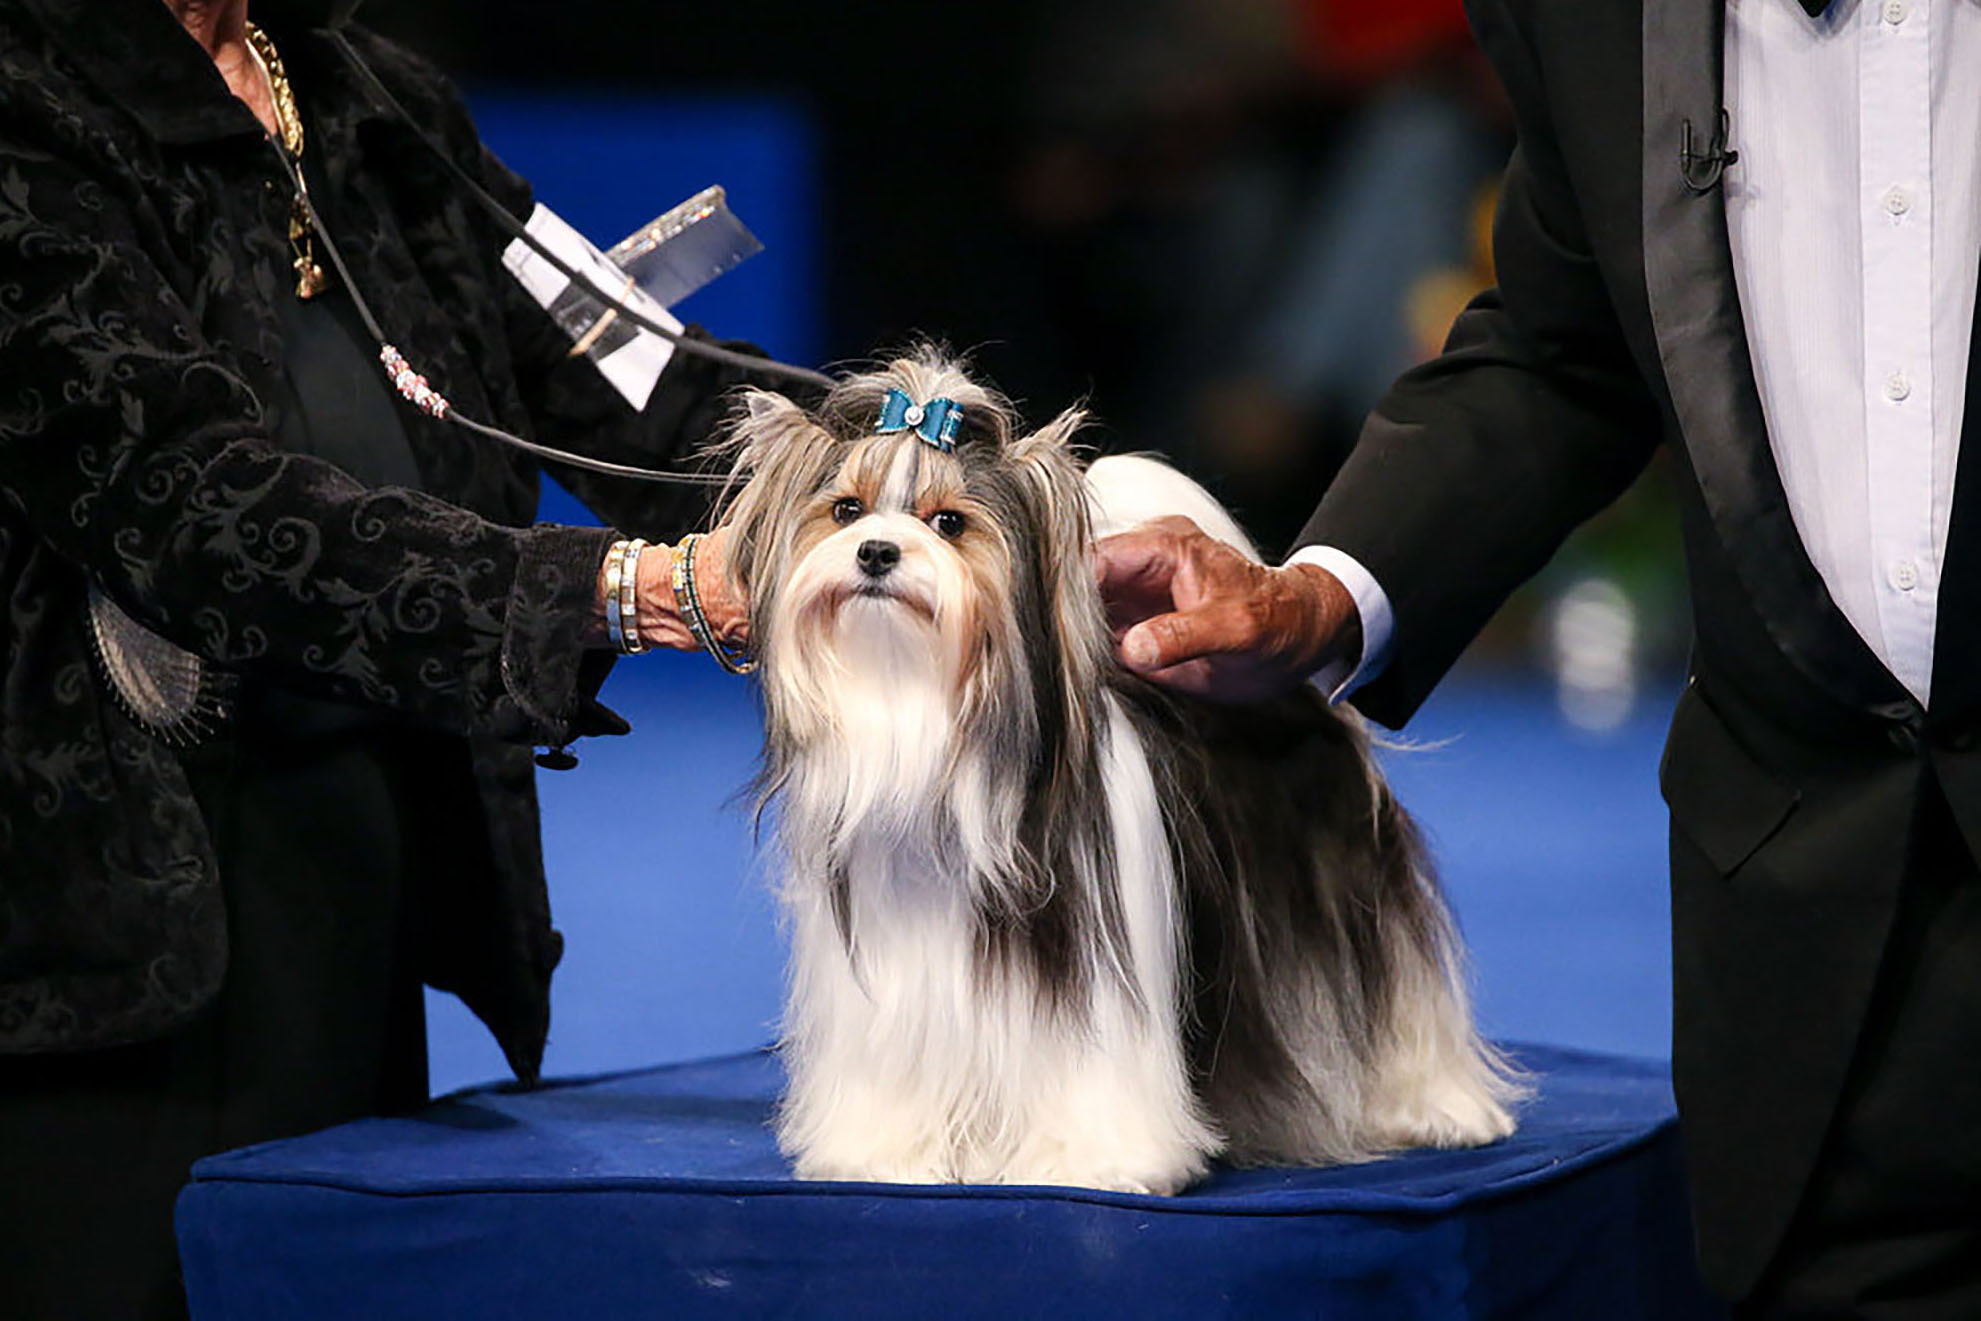 The Biewer Terrier will make its debut at the show.